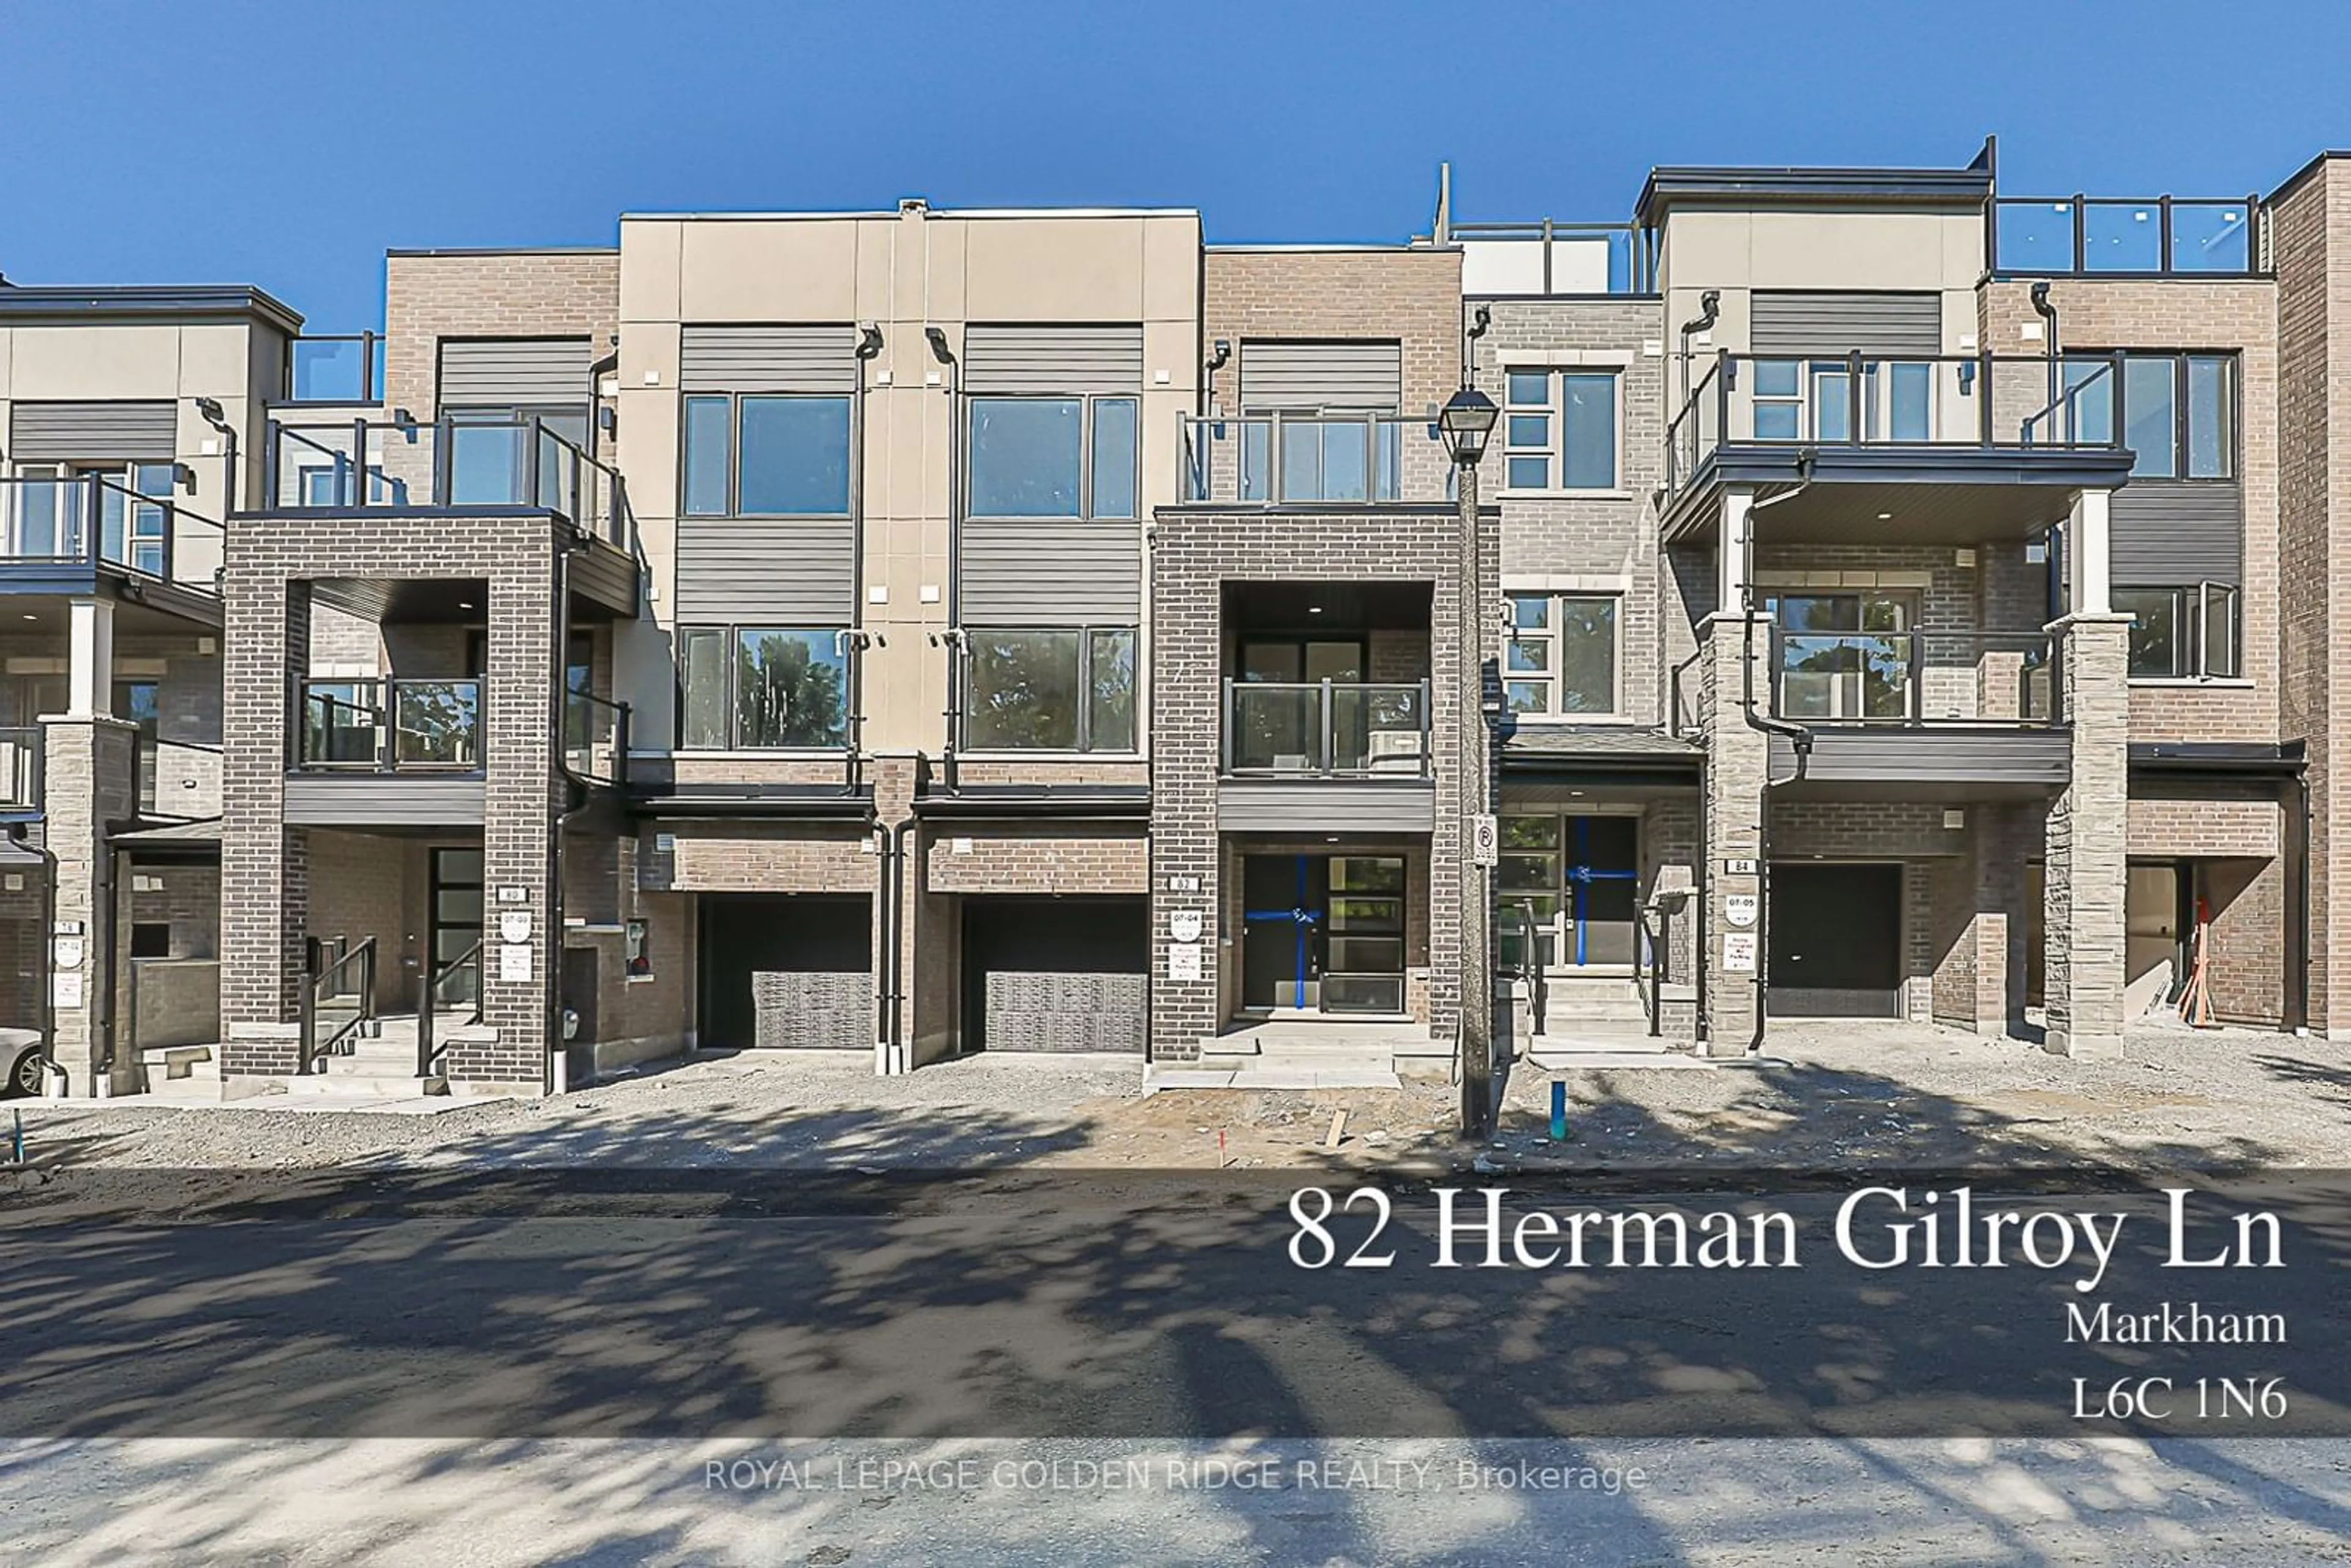 A pic from exterior of the house or condo for 82 Herman Gilroy Lane, Markham Ontario L6C 1N6